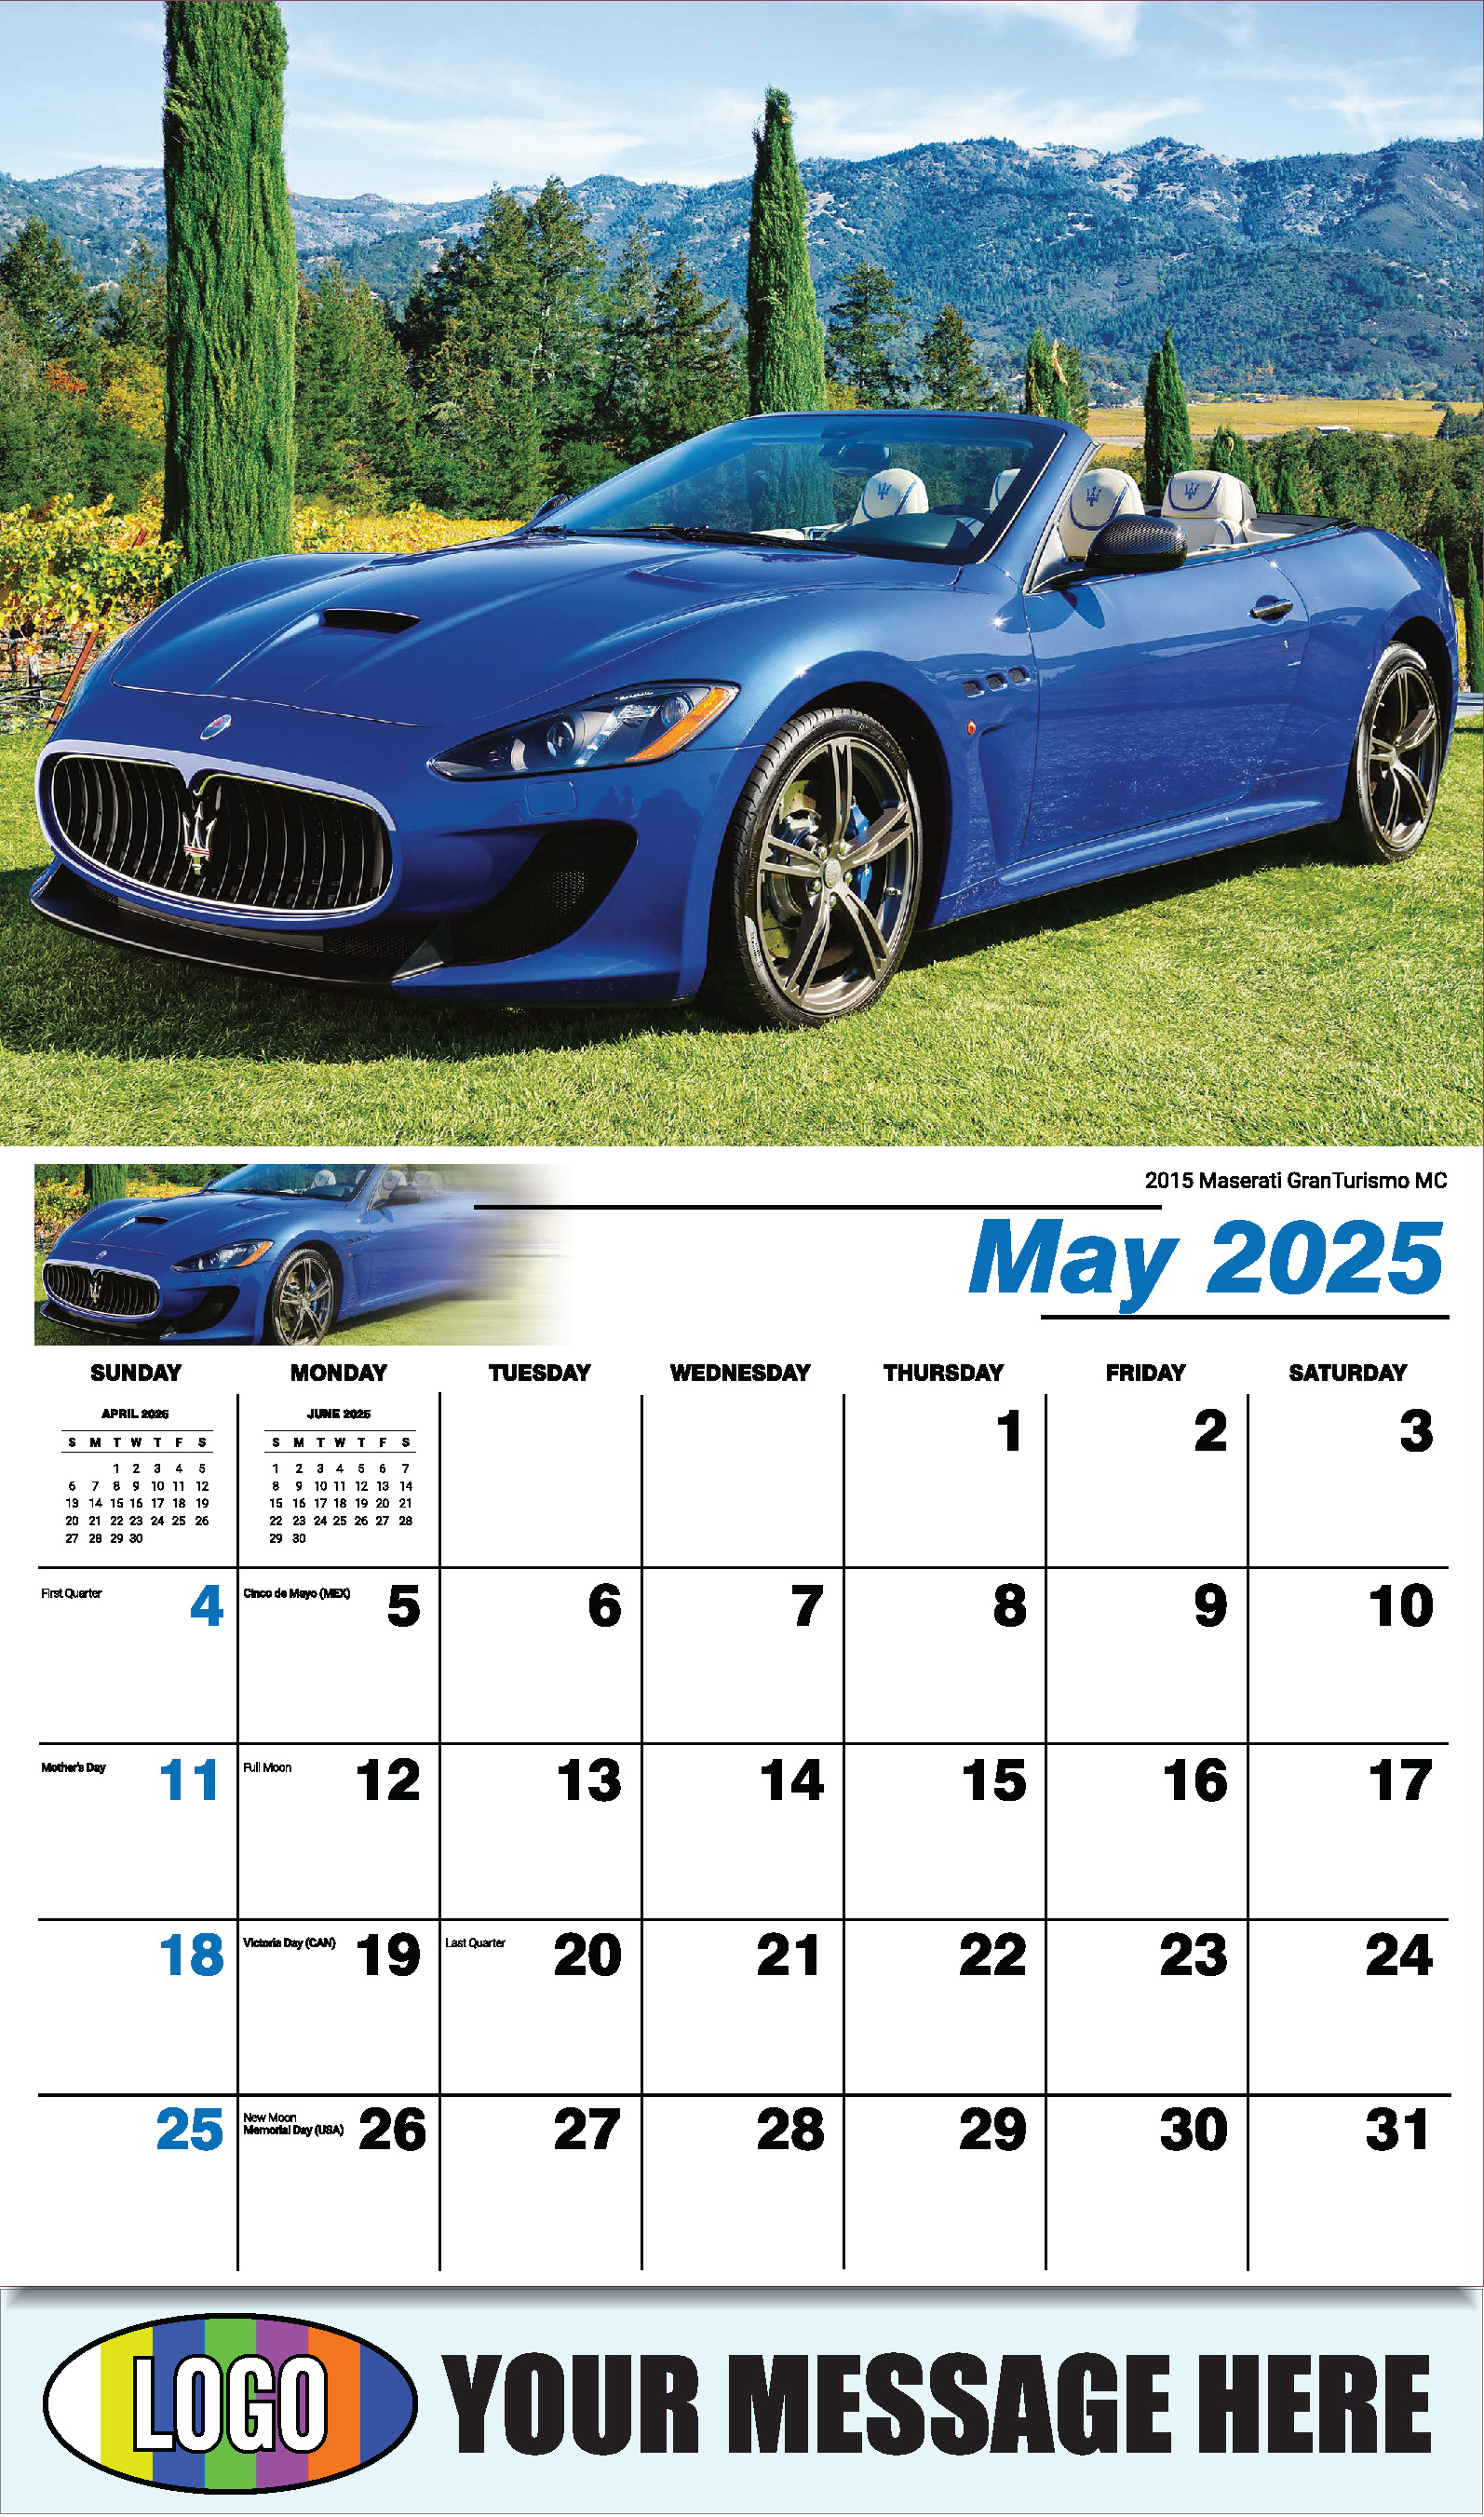 Exotic Cars 2025 Automotive Business Advertising Calendar - May